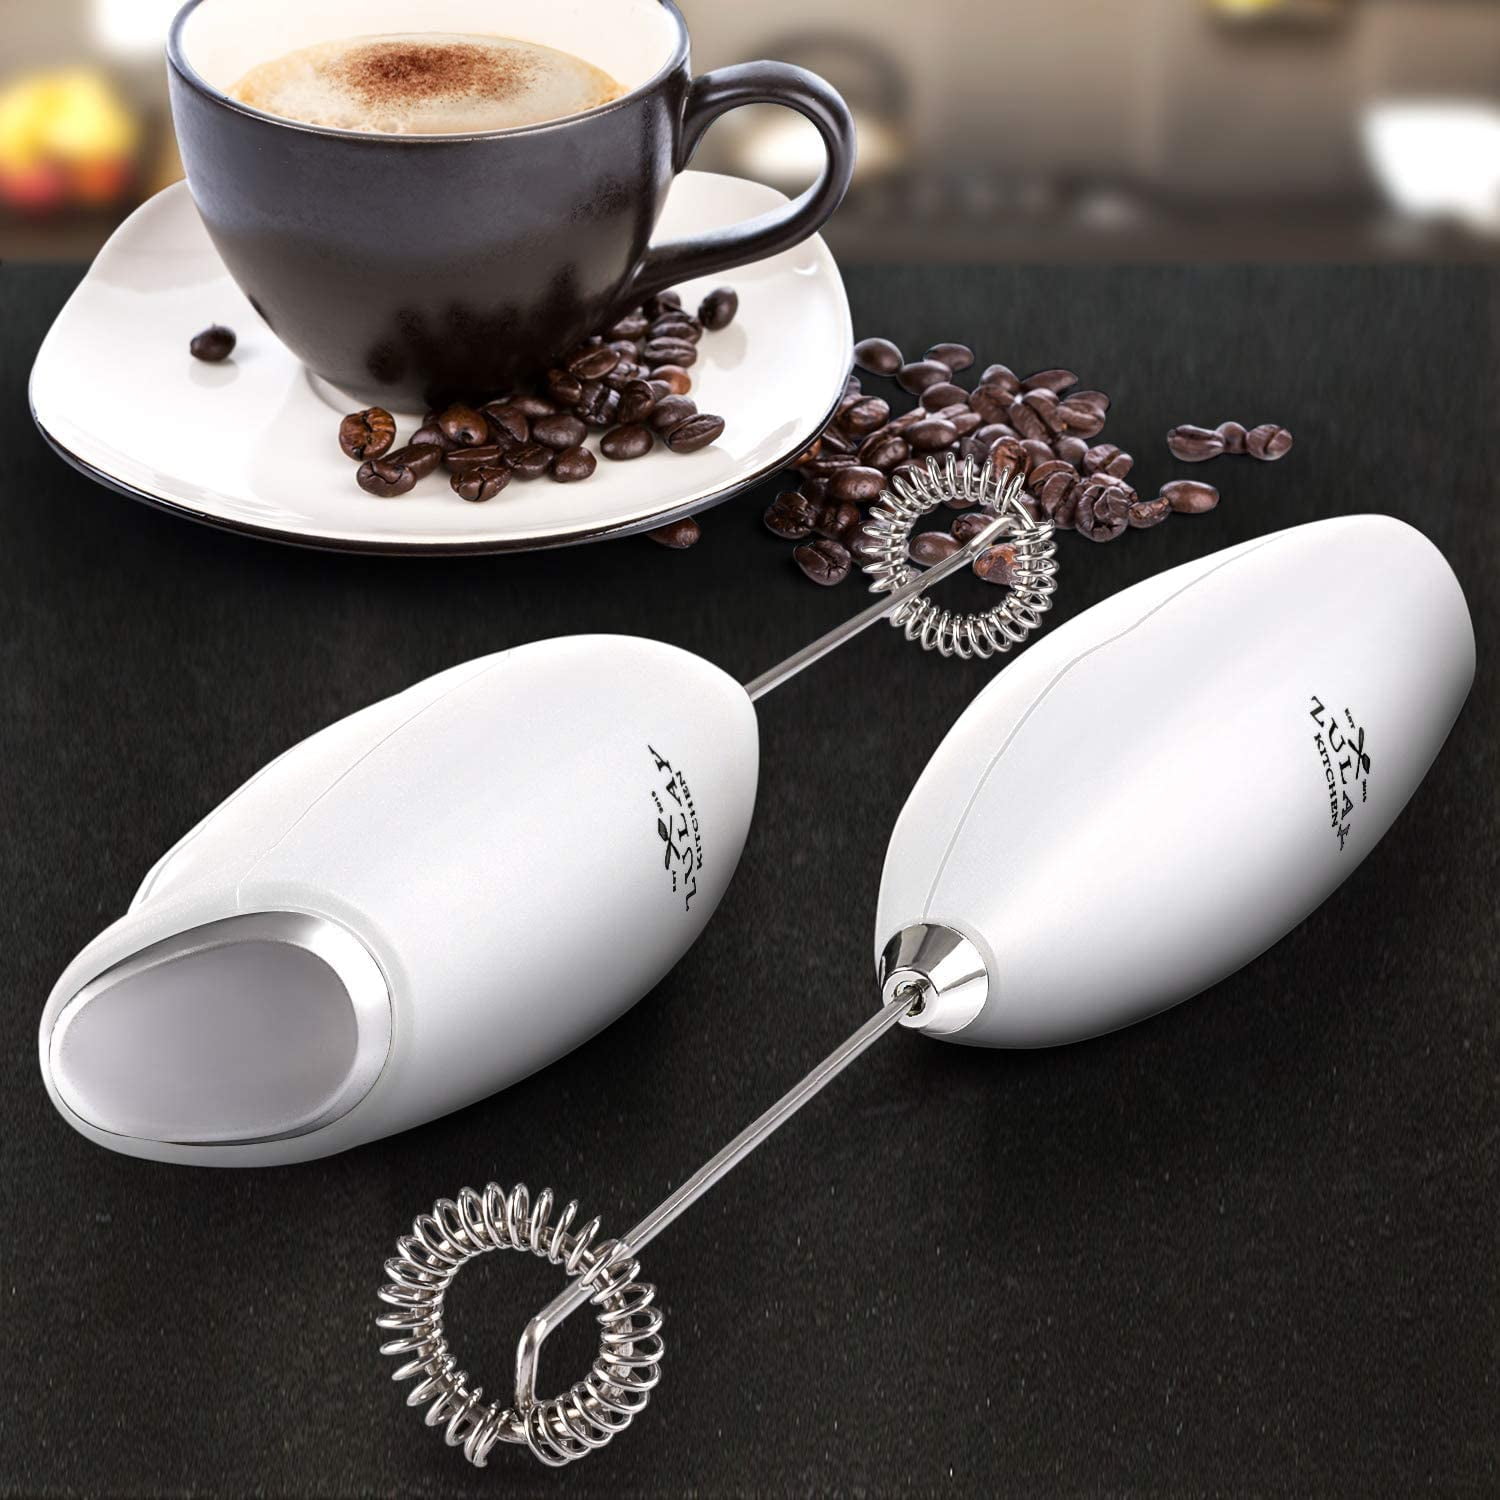  ULTRA HIGH SPEED MILK FROTHER For Coffee With NEW UPGRADED  STAND - Powerful, Compact Handheld Mixer with Infinite Uses - Super Instant  Electric Foam Maker with Stainless Steel Whisk by Zulay (